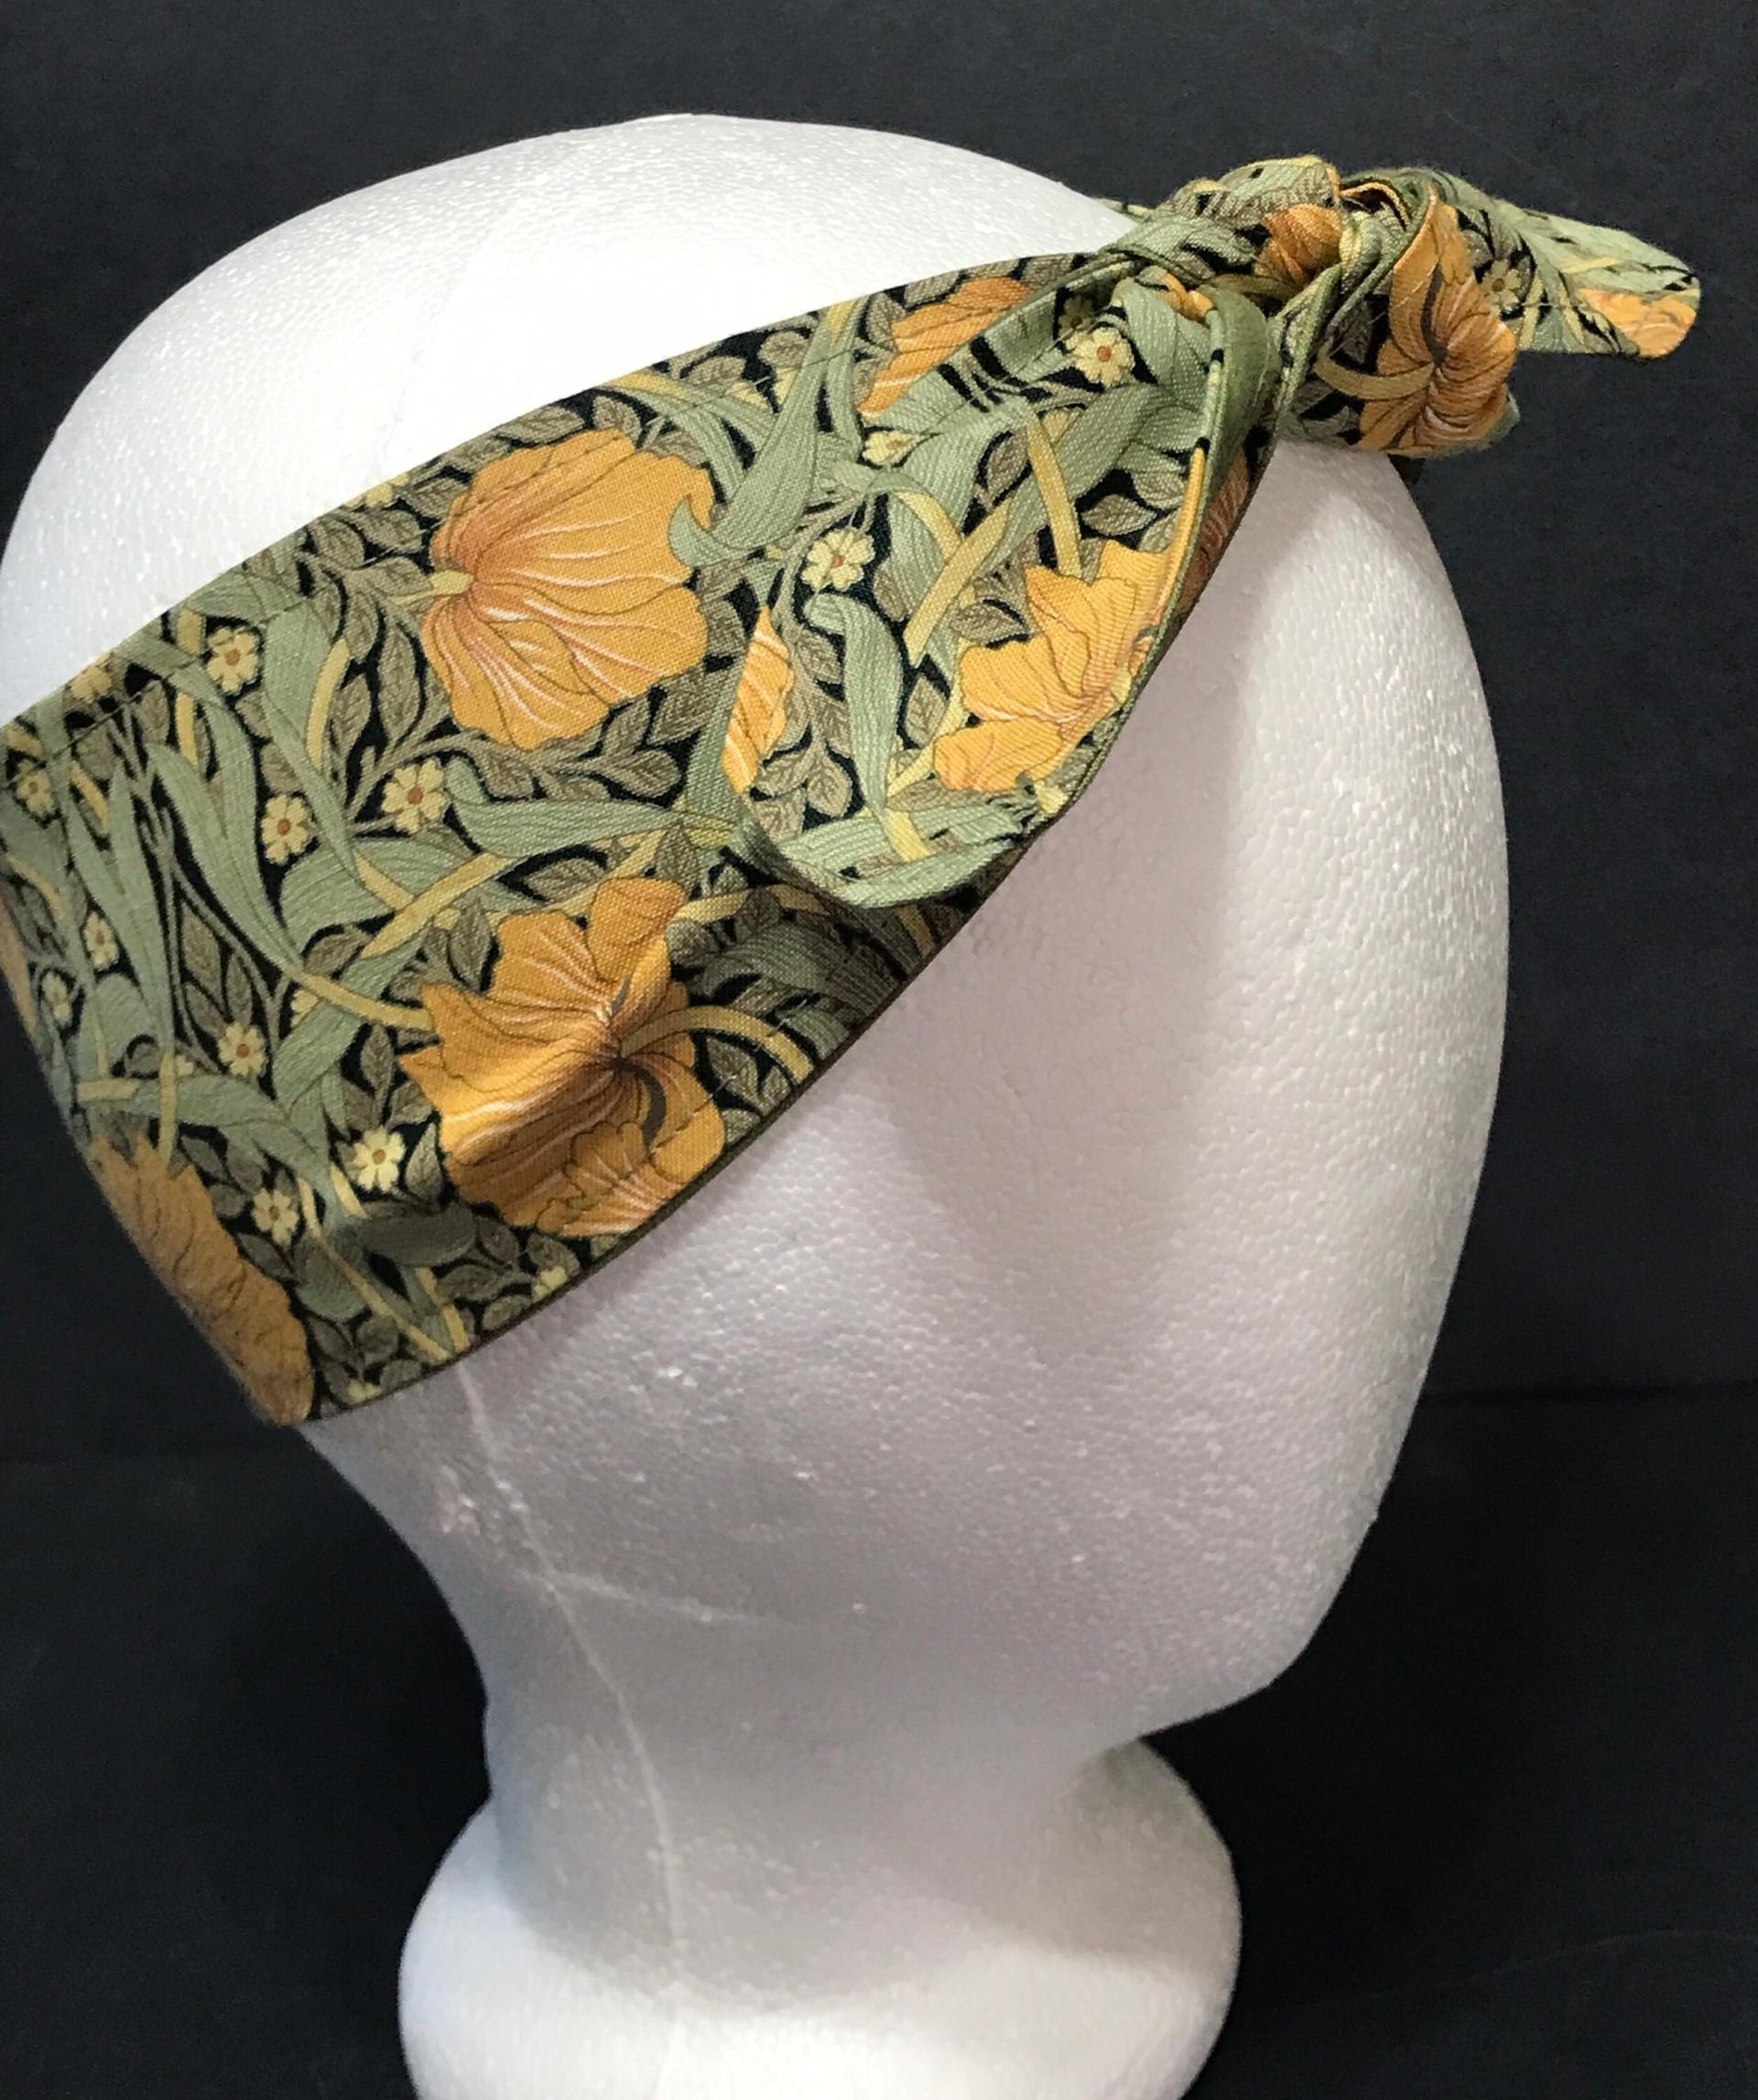 3” Wide William Morris headband, self tie, floral, hair tie, hair wrap, pin up style, retro style